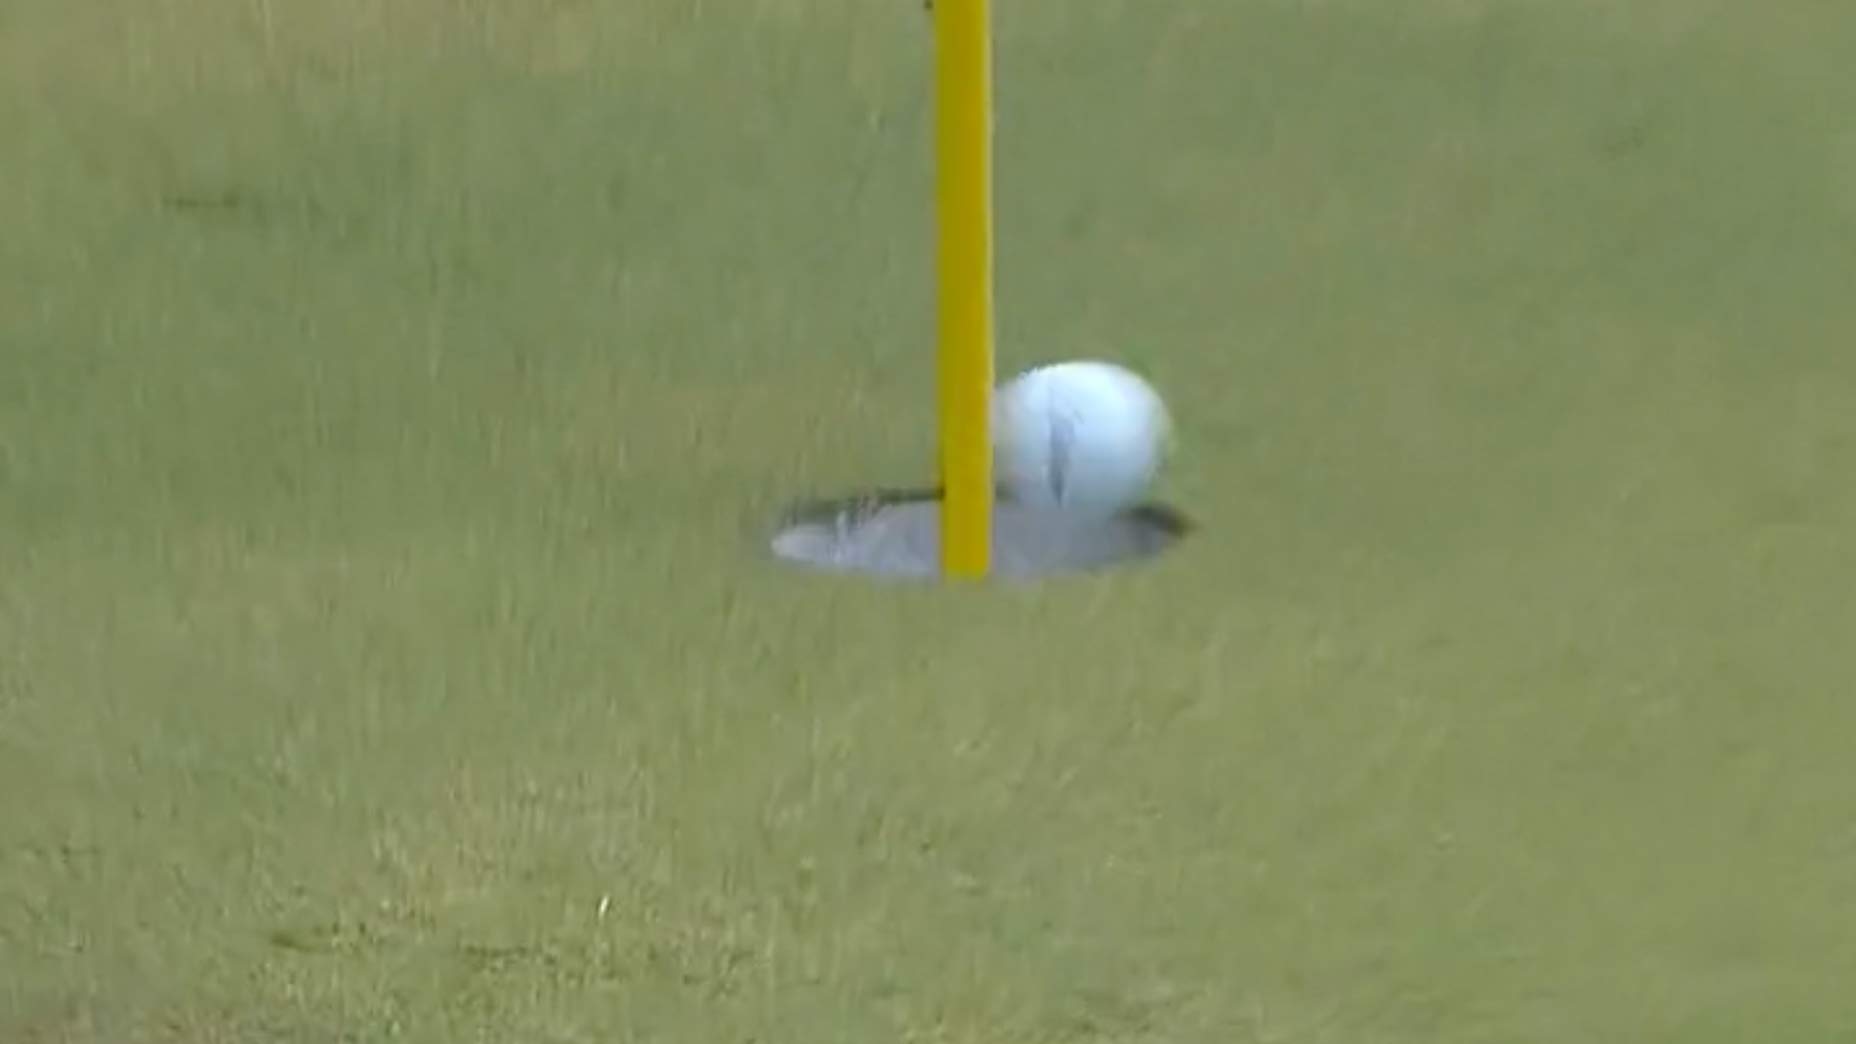 Viktor Hovland's birdie putt on the 8th hole Saturday struck the center of the flagstick.